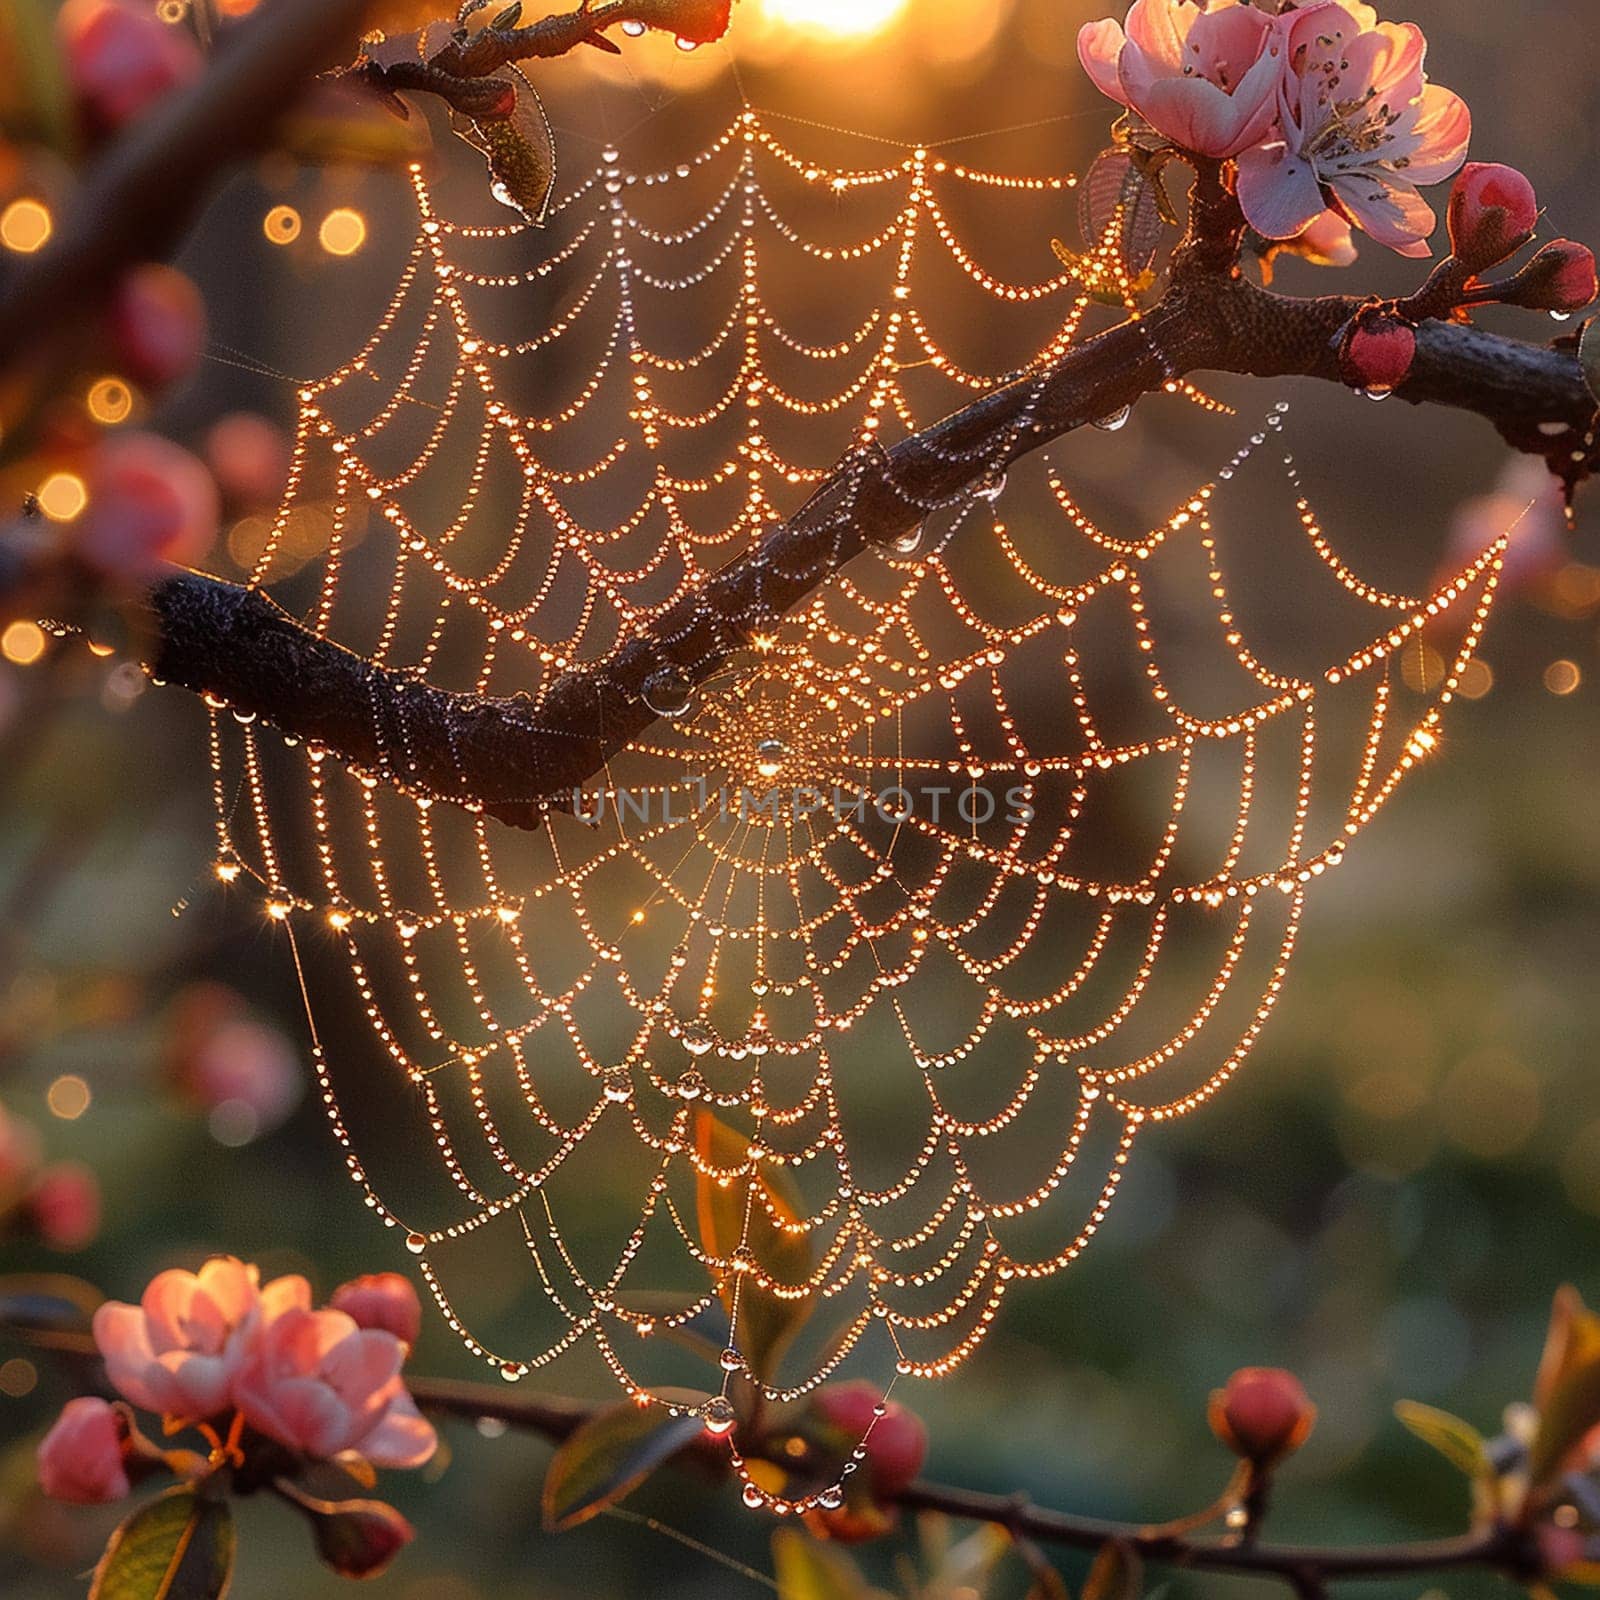 A dew-covered spider web in the early morning light, symbolizing the interconnectedness of life.